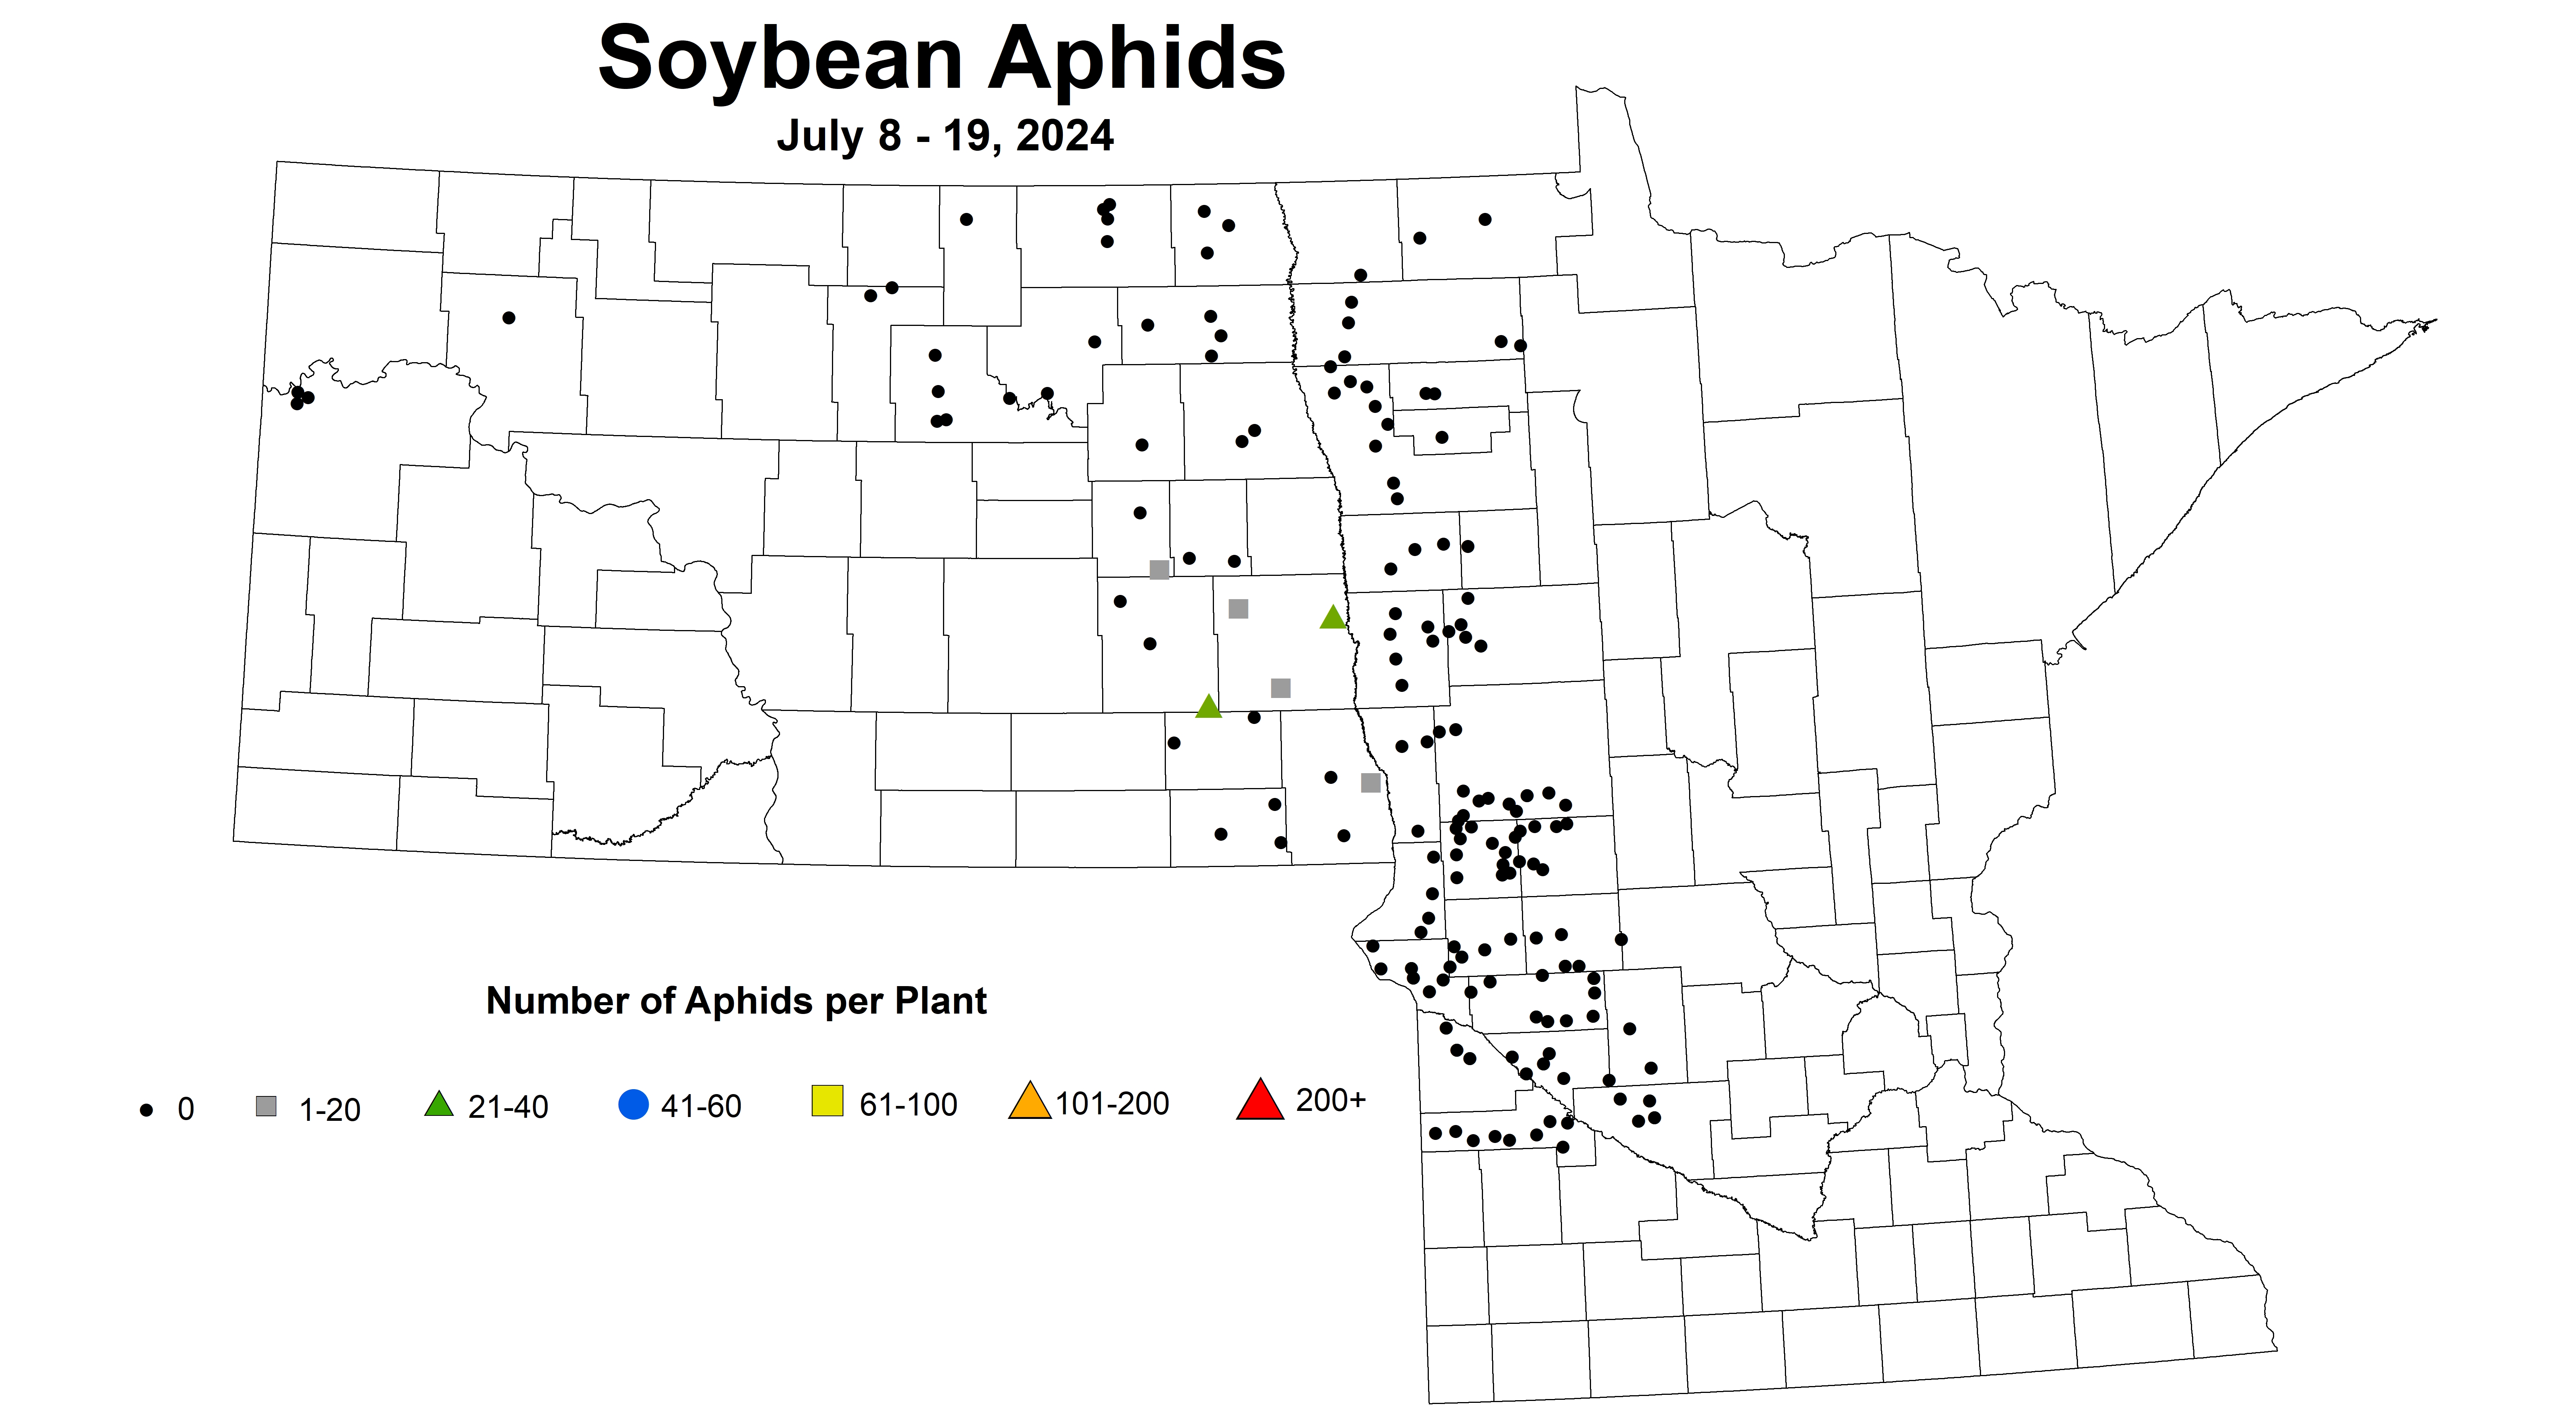 soybean aphid number July 8-19 2024